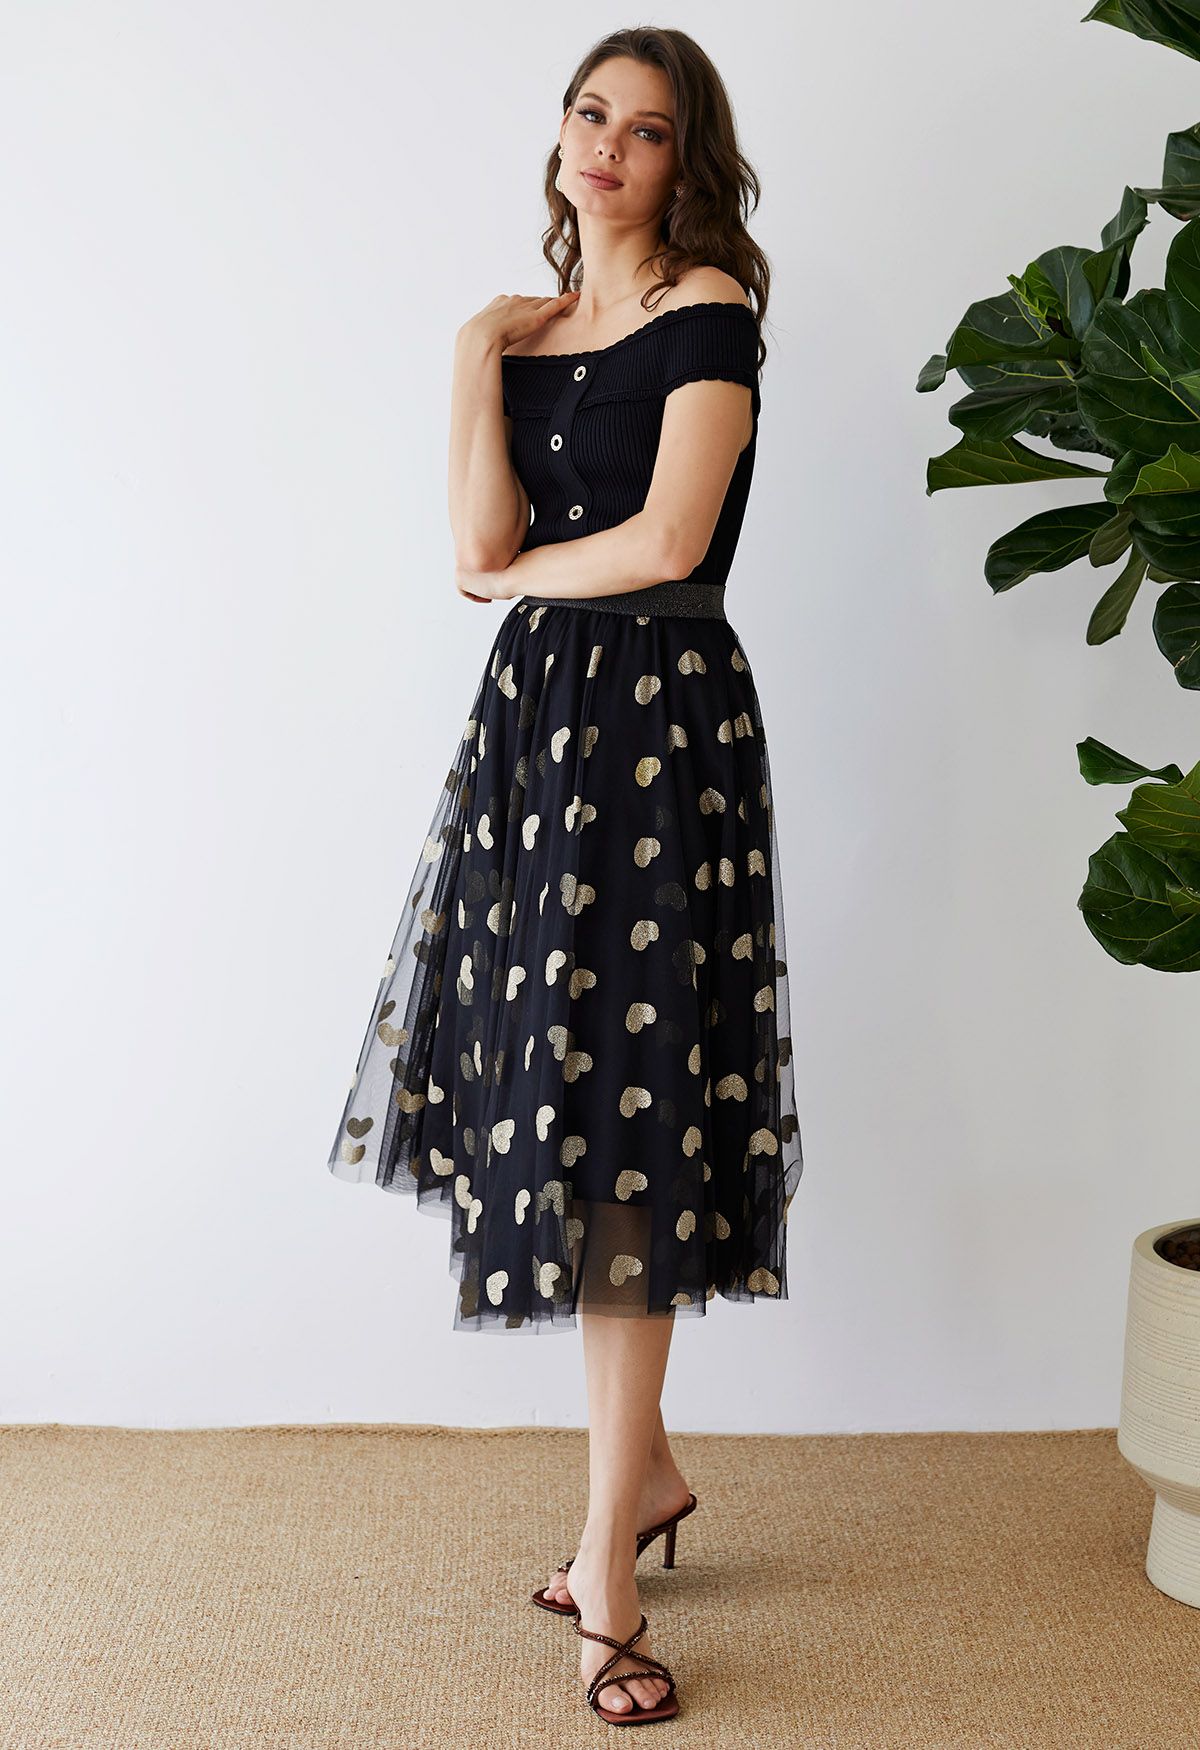 Golden Button Decorated Scalloped Off-Shoulder Top in Black